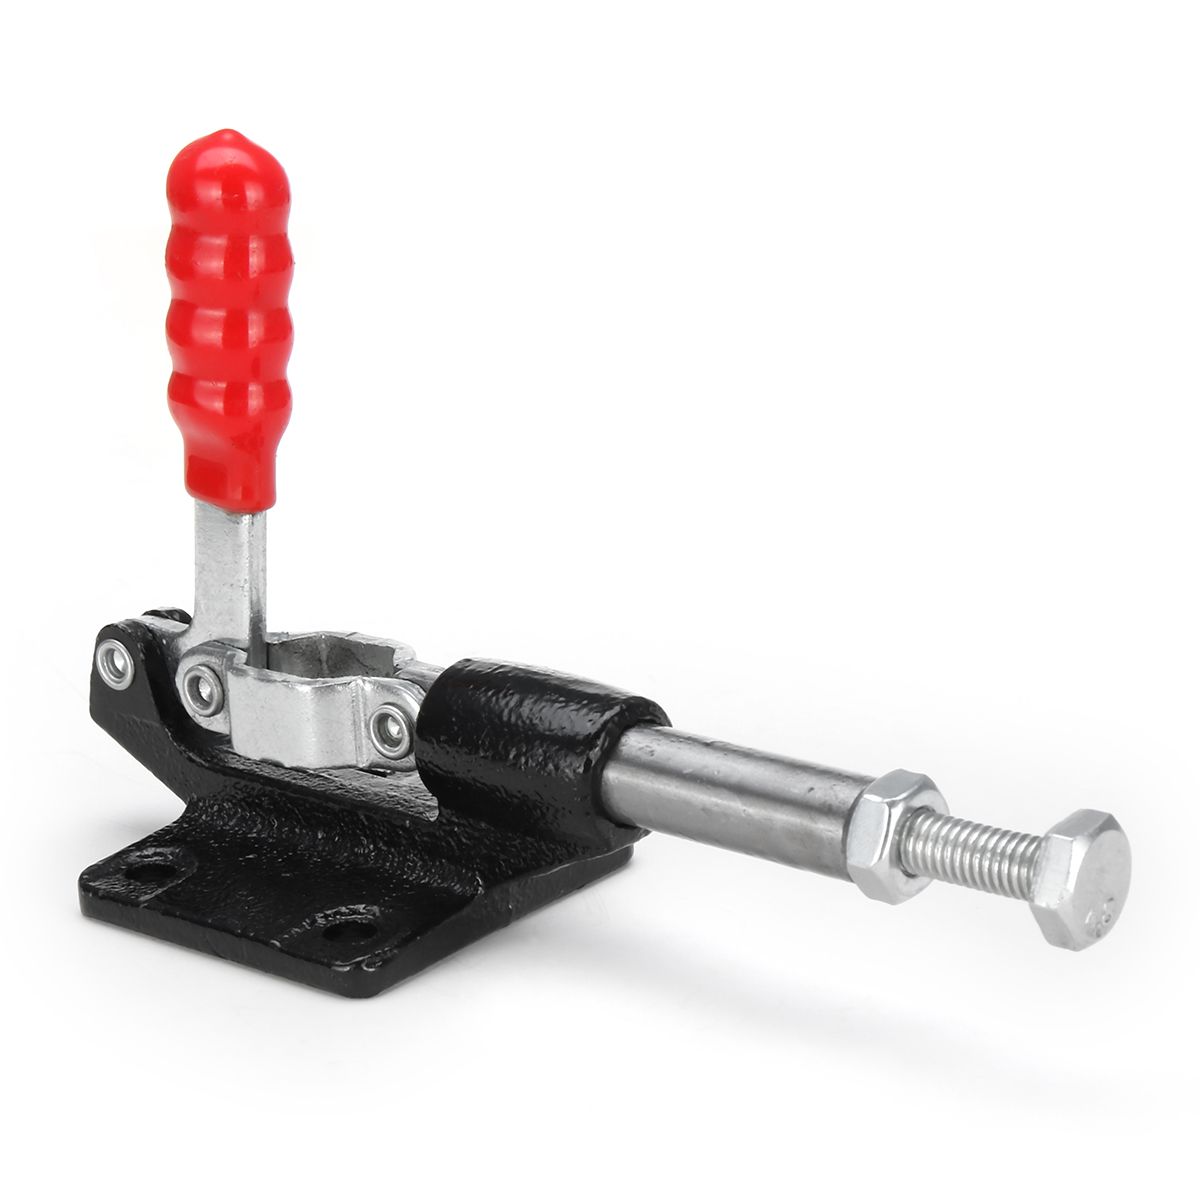 GH305C-Toggle-Clamp-BRH-500-Lbs-32mm-Plunger-227Kg-Holding-Capacity-Push-Pull-1392937